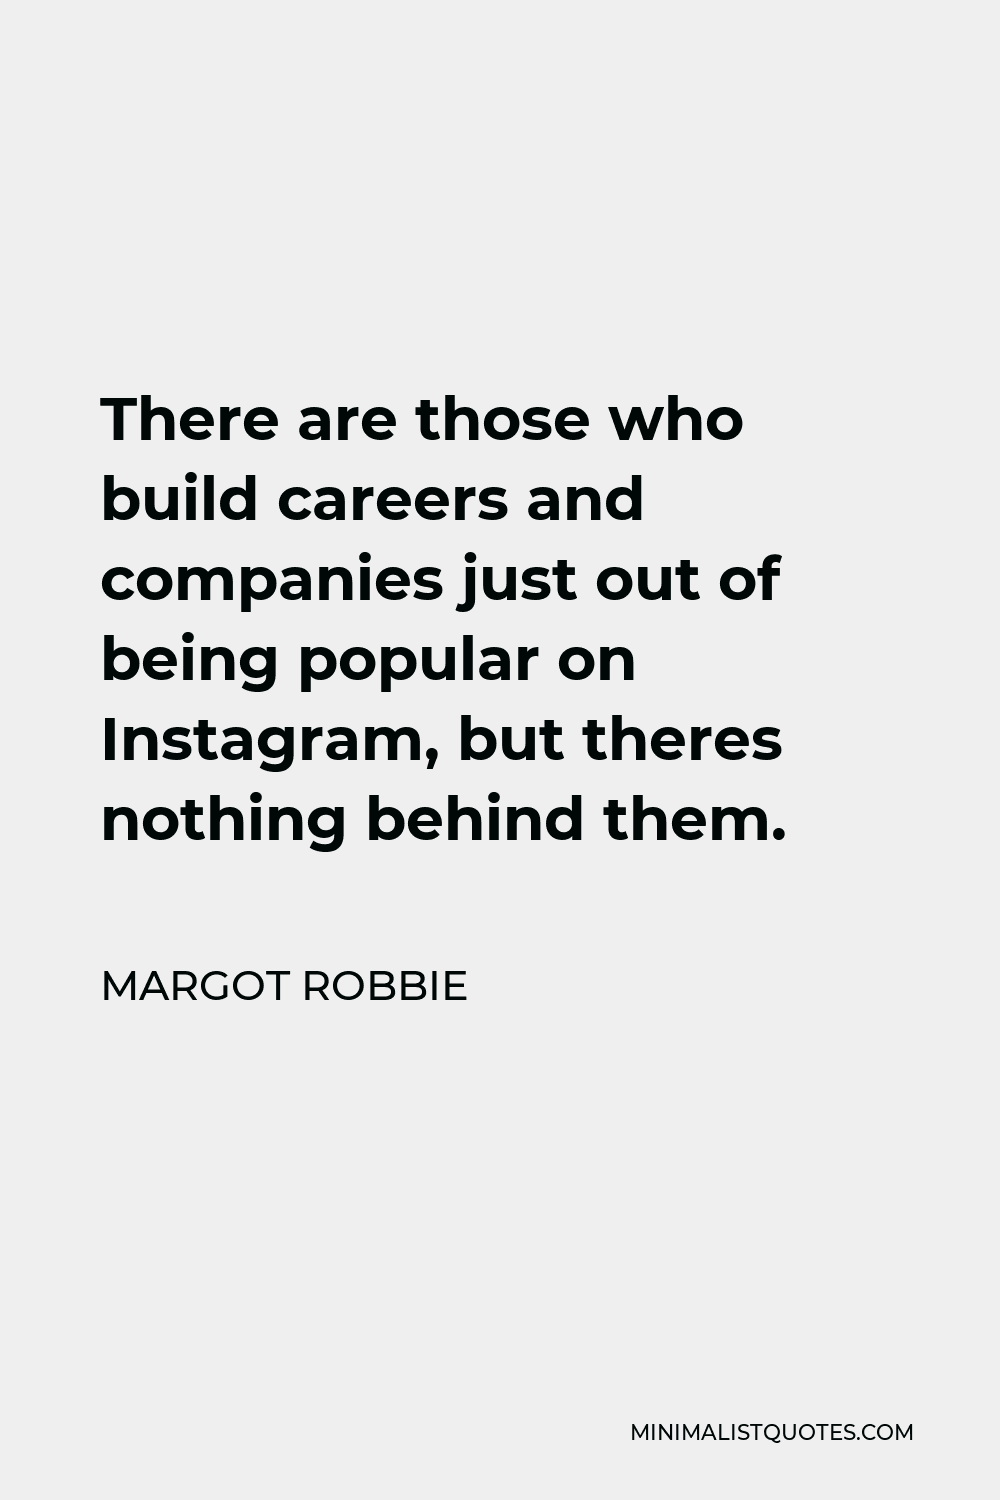 Margot Robbie Quote - There are those who build careers and companies just out of being popular on Instagram, but theres nothing behind them.